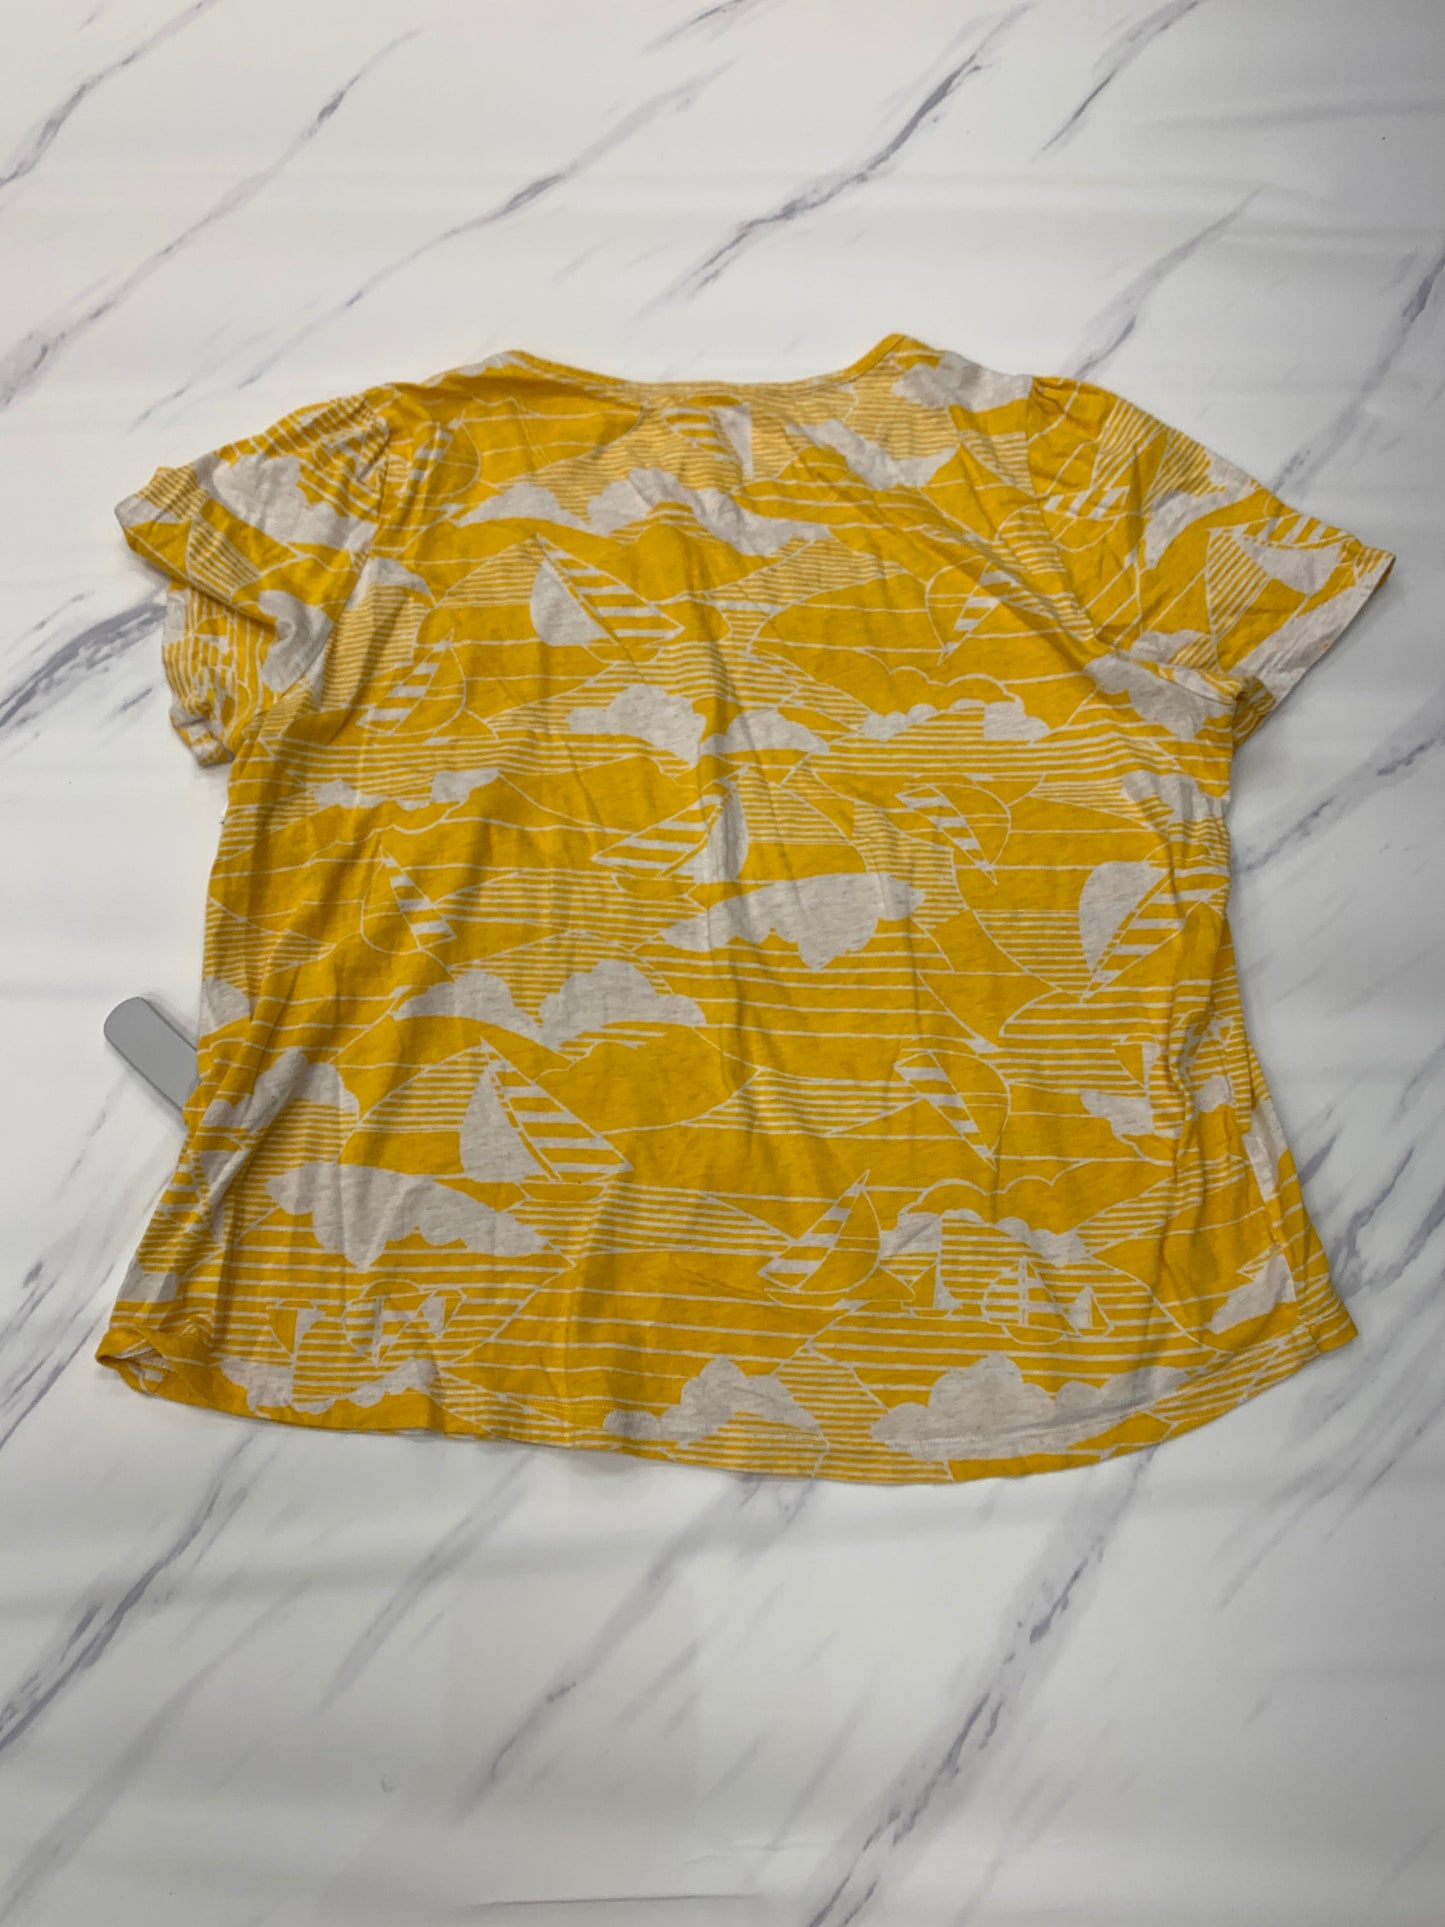 Top Short Sleeve By Anthropologie  Size: Xl